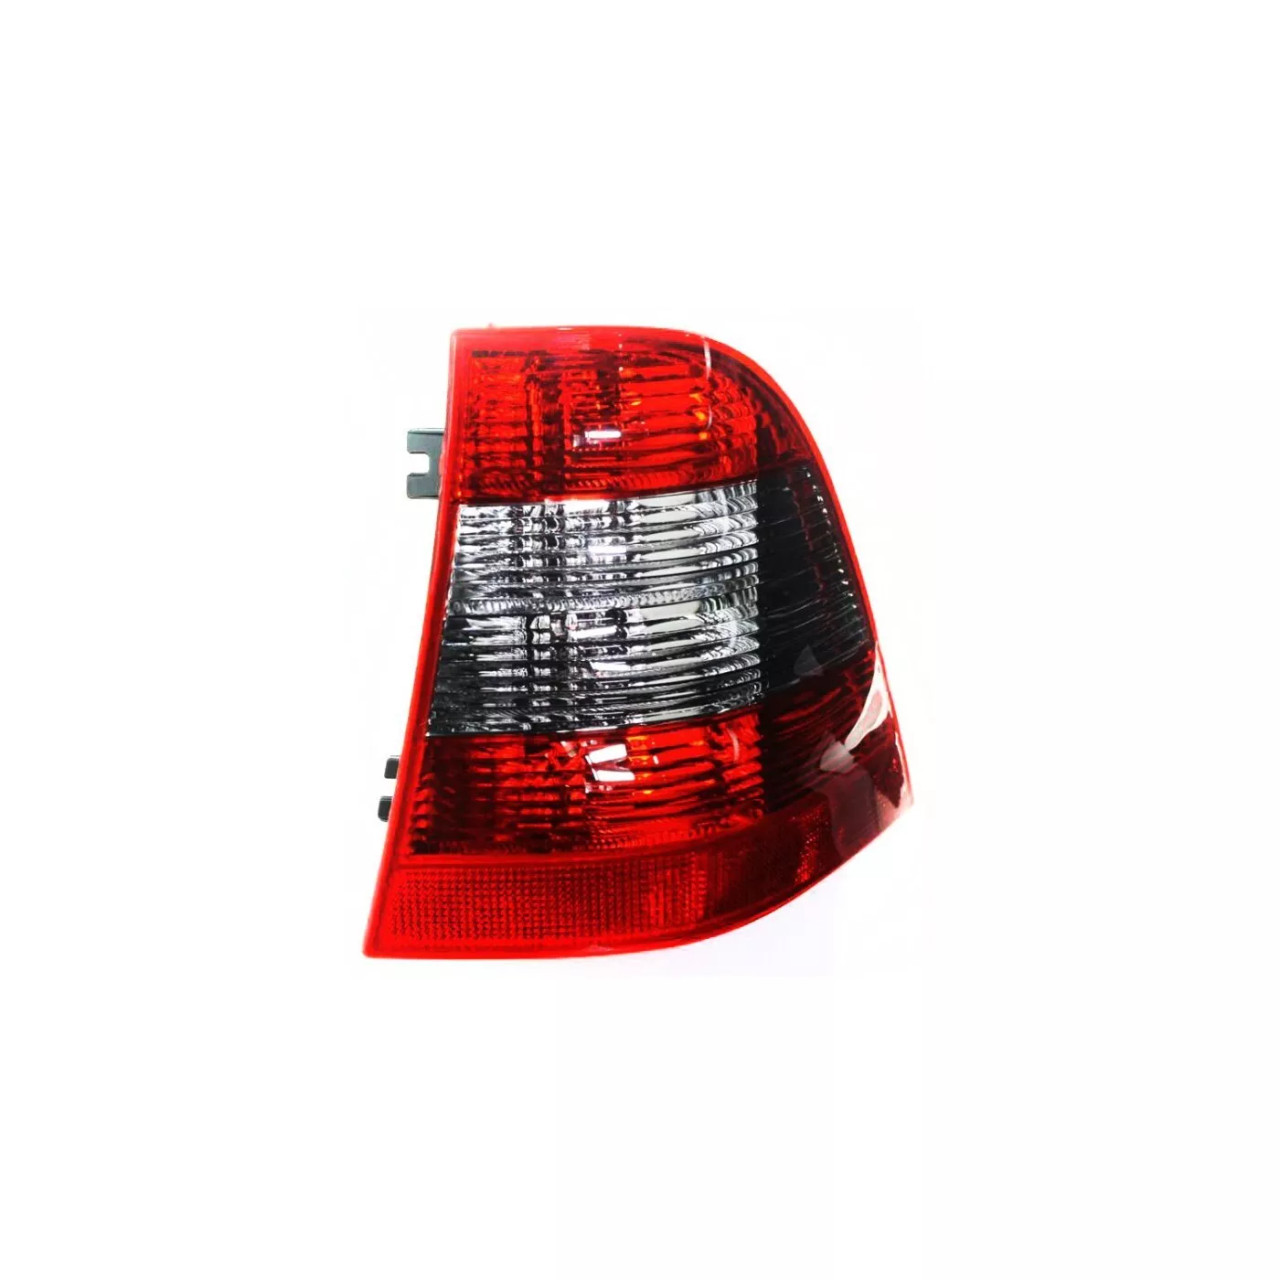 Halogen Tail Light Set For 2005 Mercedes Benz ML350 (163) Body Clear/Red 2Pcs